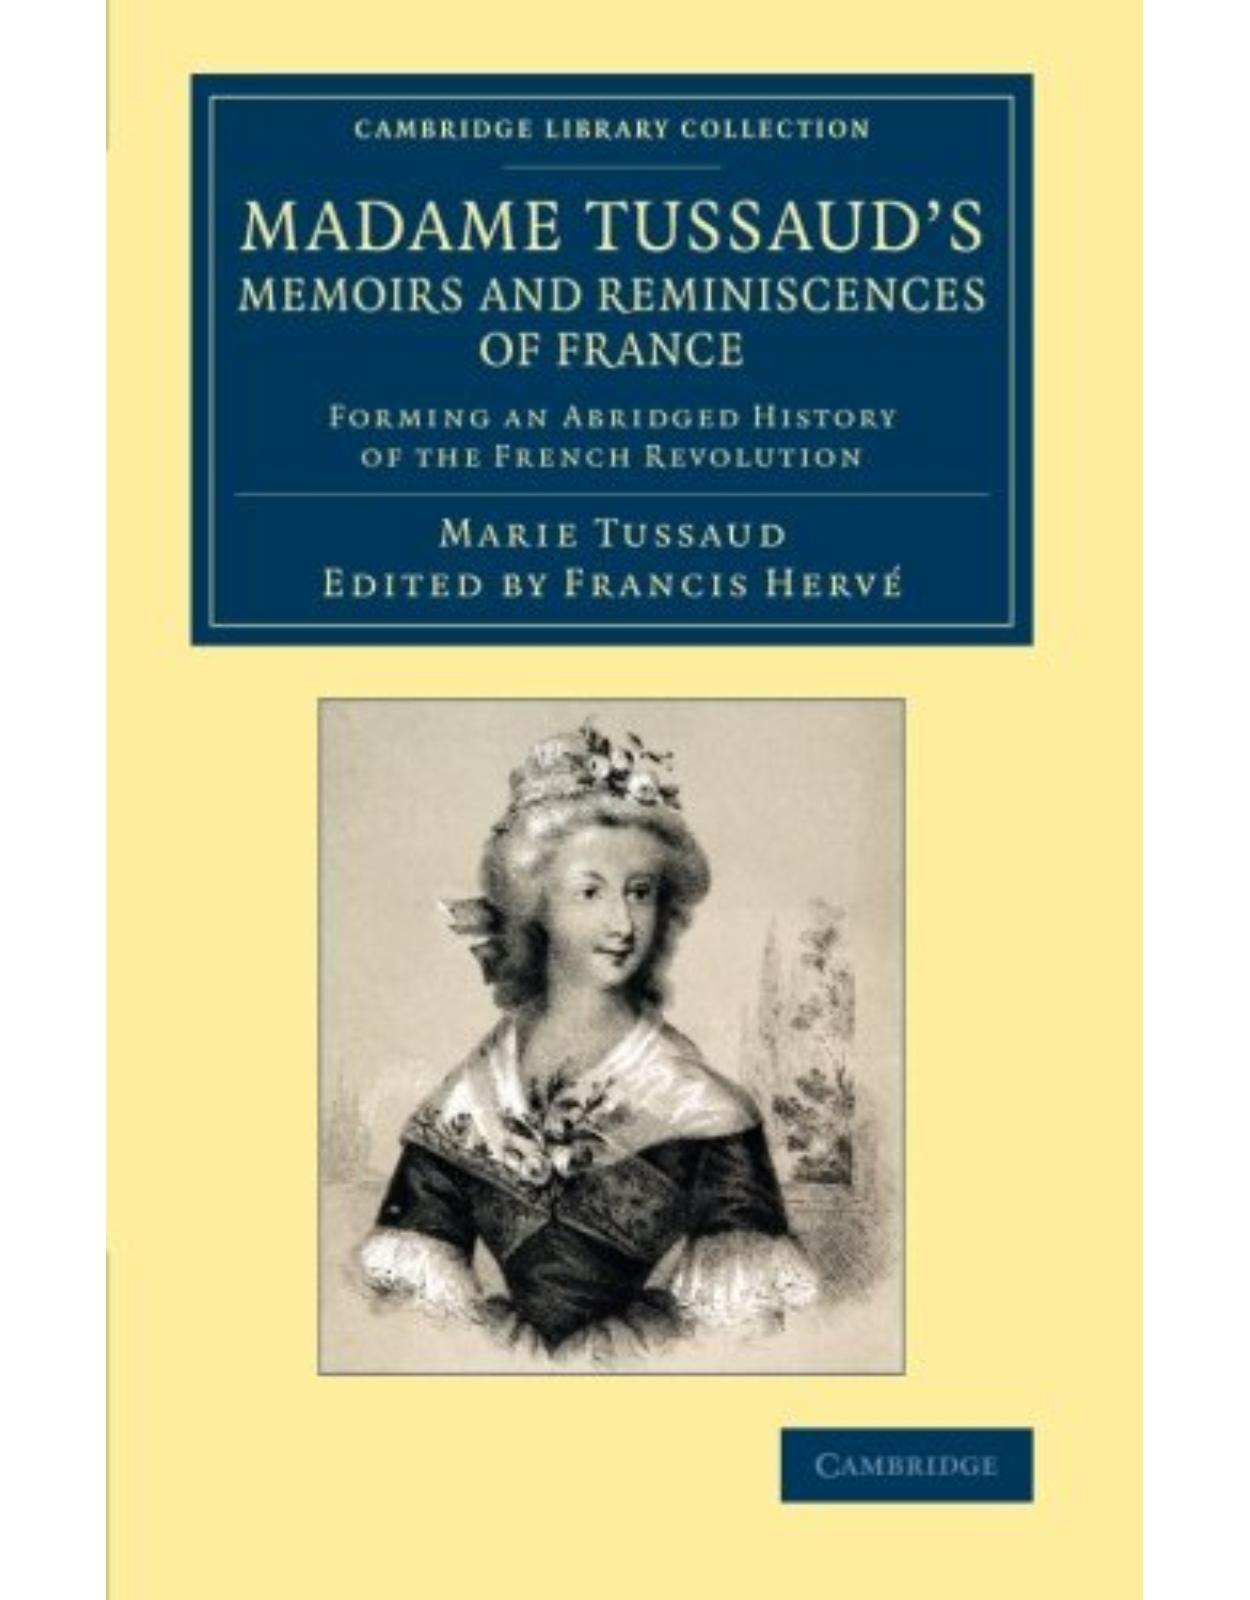 Madame Tussaud's Memoirs and Reminiscences of France: Forming an Abridged History of the French Revolution (Cambridge Library Collection - European History)